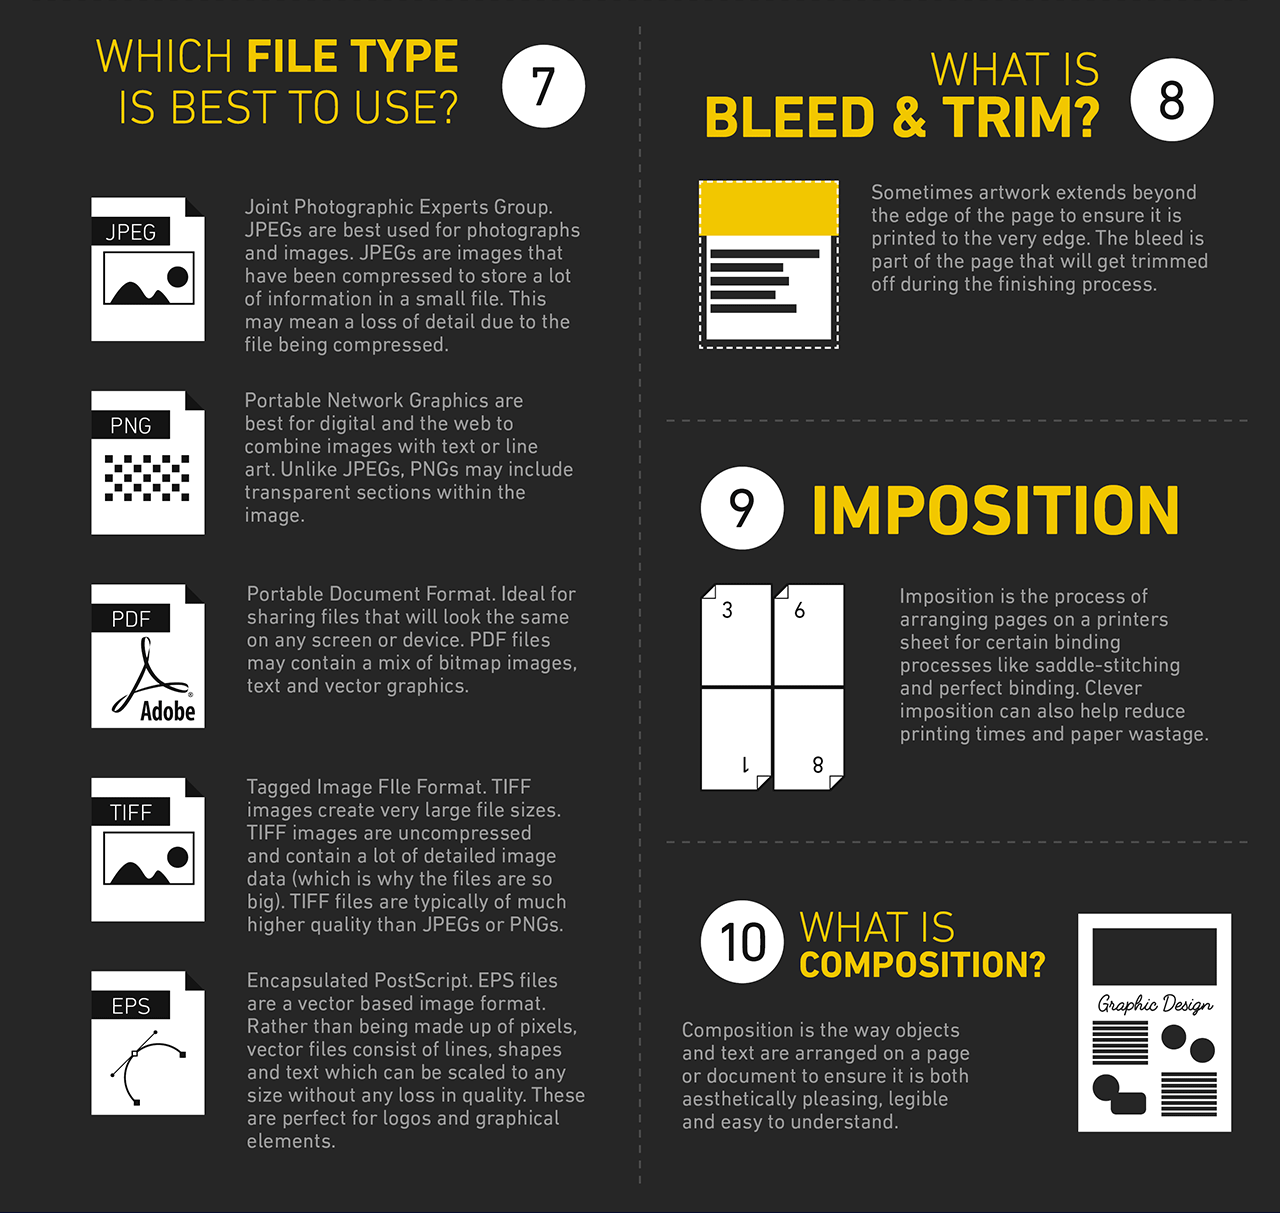 File formats, bleed, imposition & composition